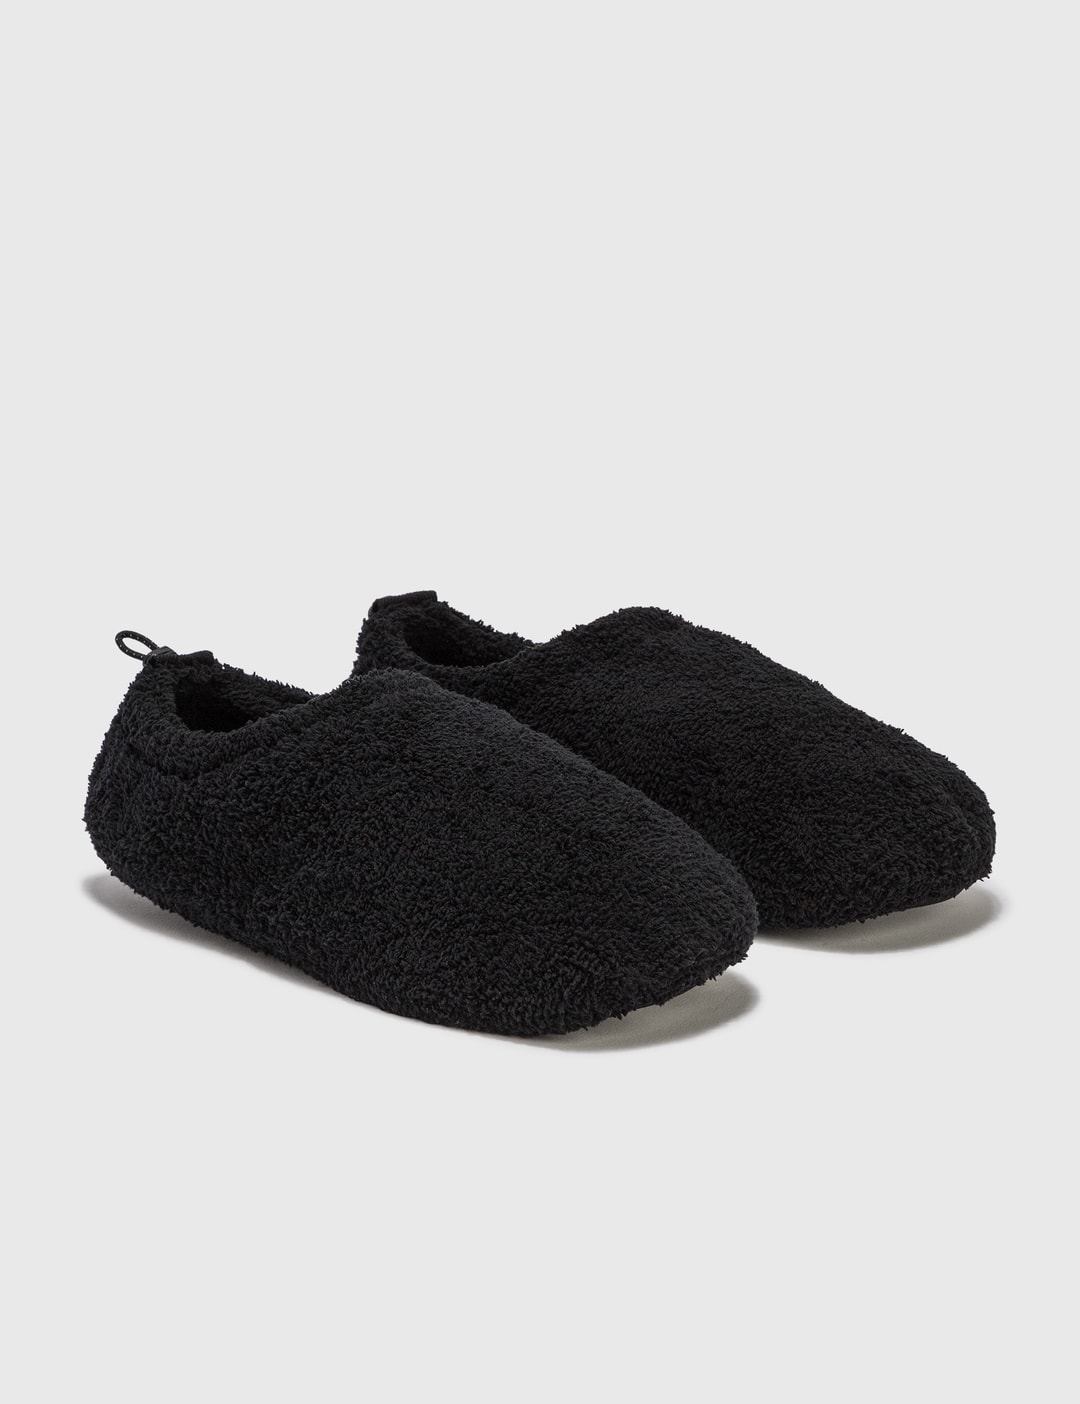 screech innovation Postimpressionisme Undercover - Cotton Slippers | HBX - Globally Curated Fashion and Lifestyle  by Hypebeast